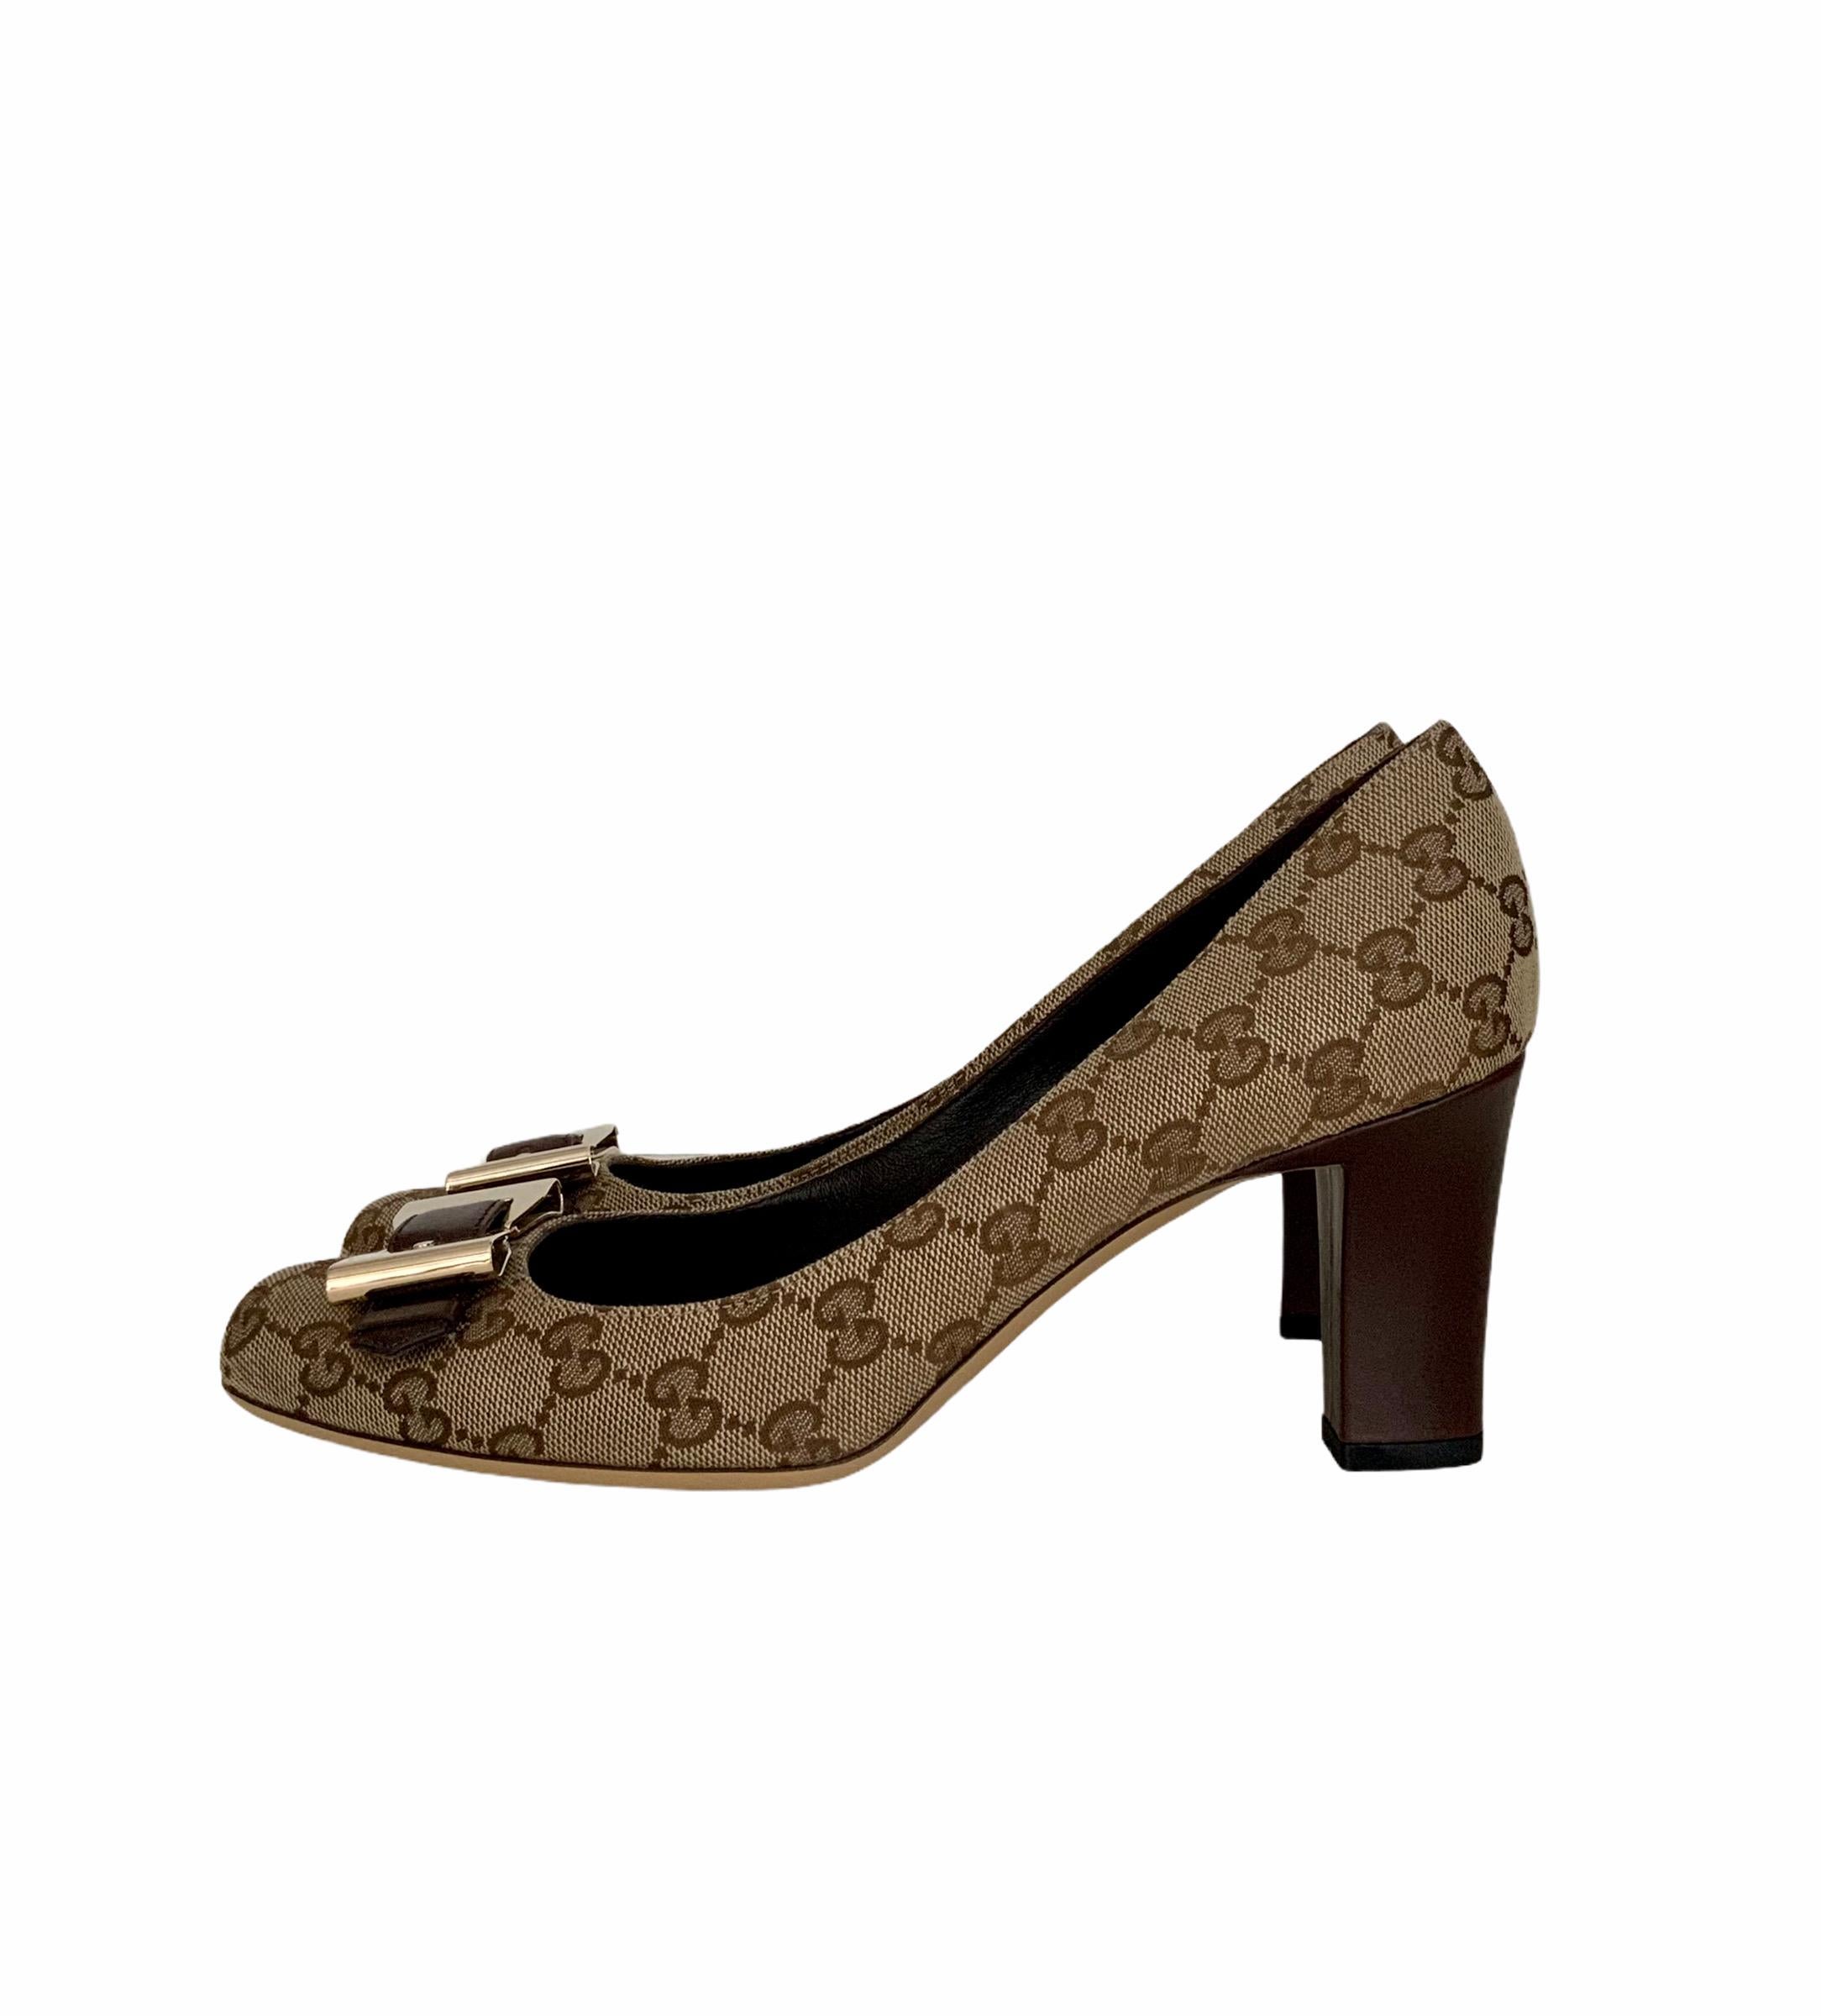 Women's Gucci New GG Canvas Buckle Bow Pumps